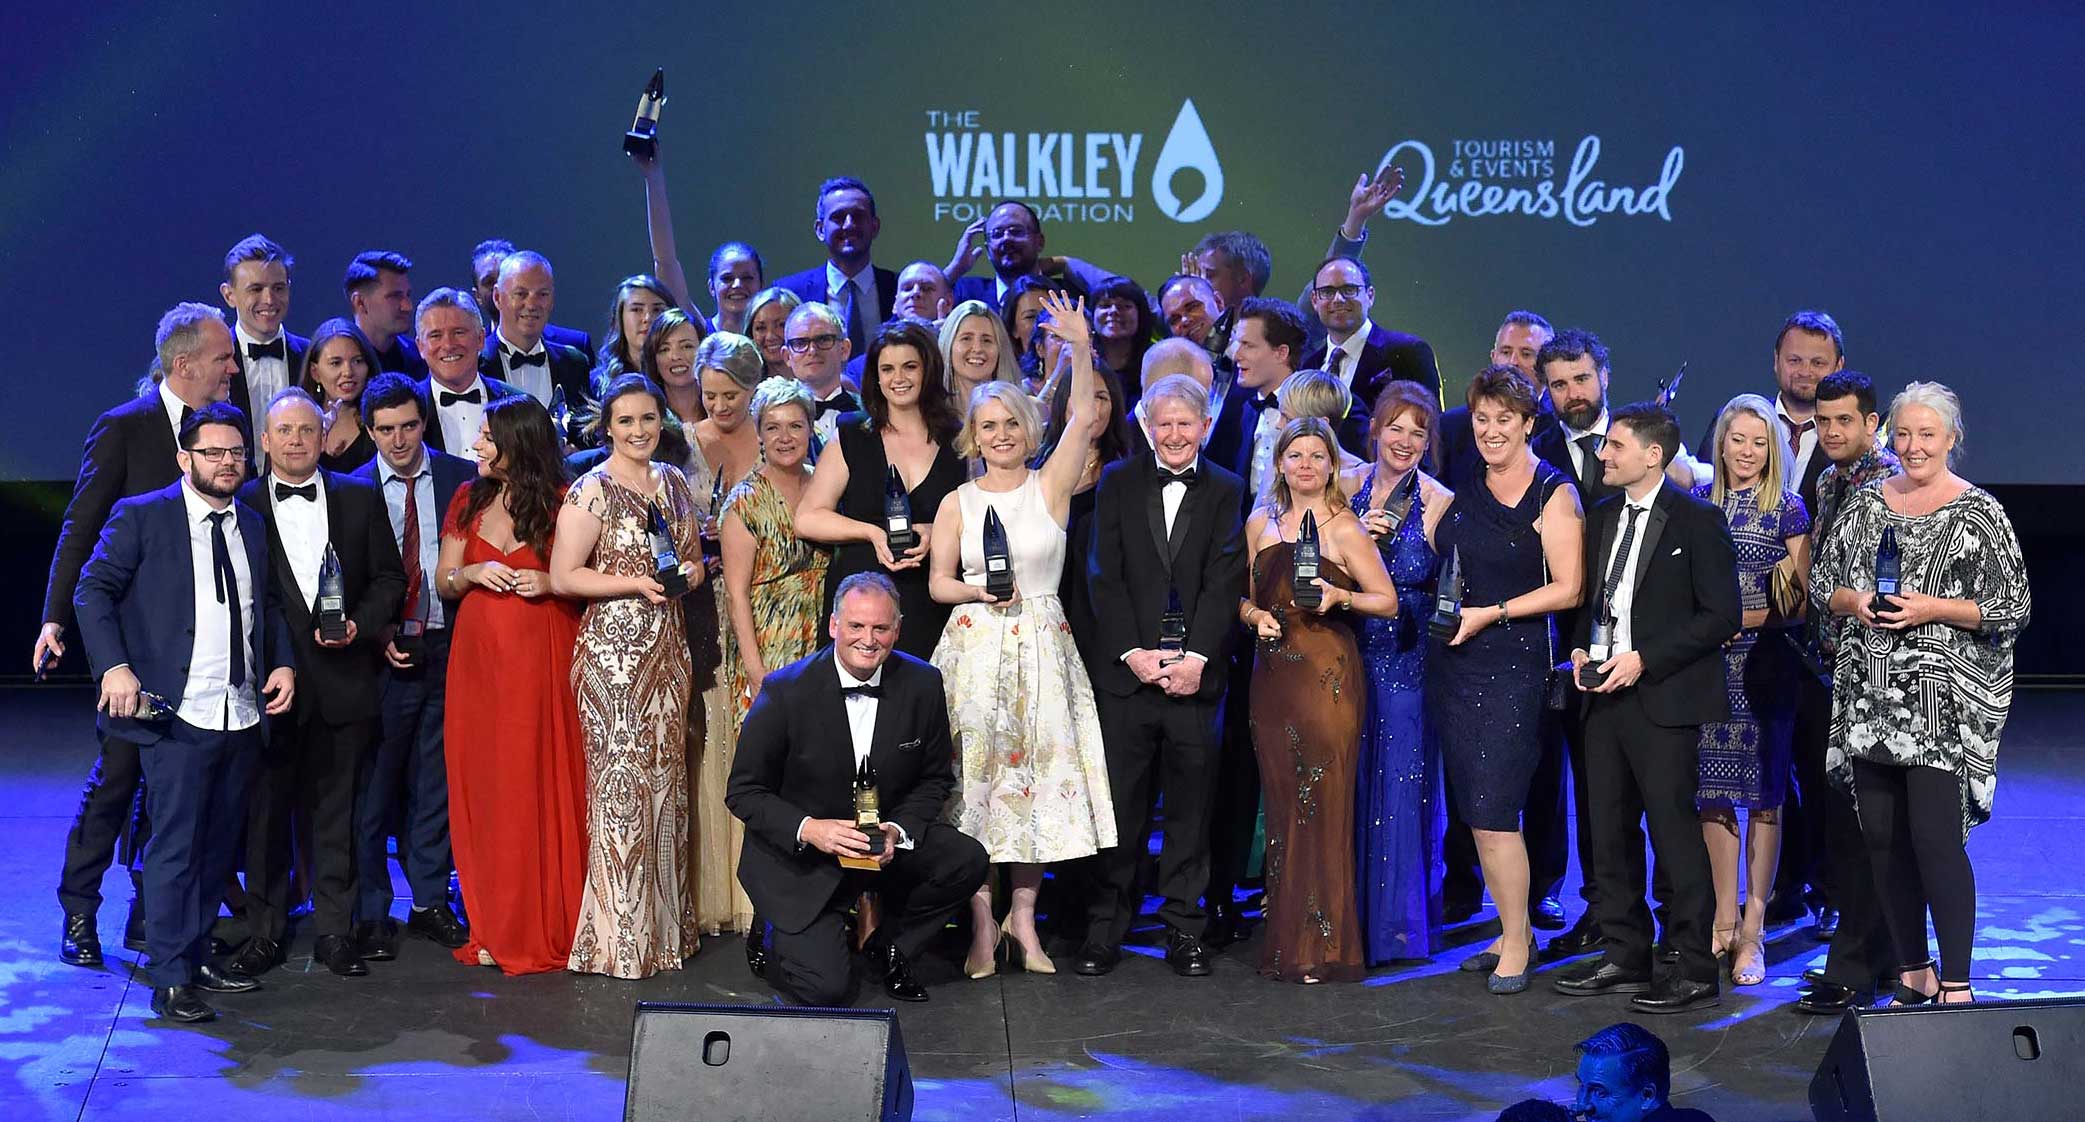 Finalists announced for the 2018 Walkley Awards for Excellence in Journalism